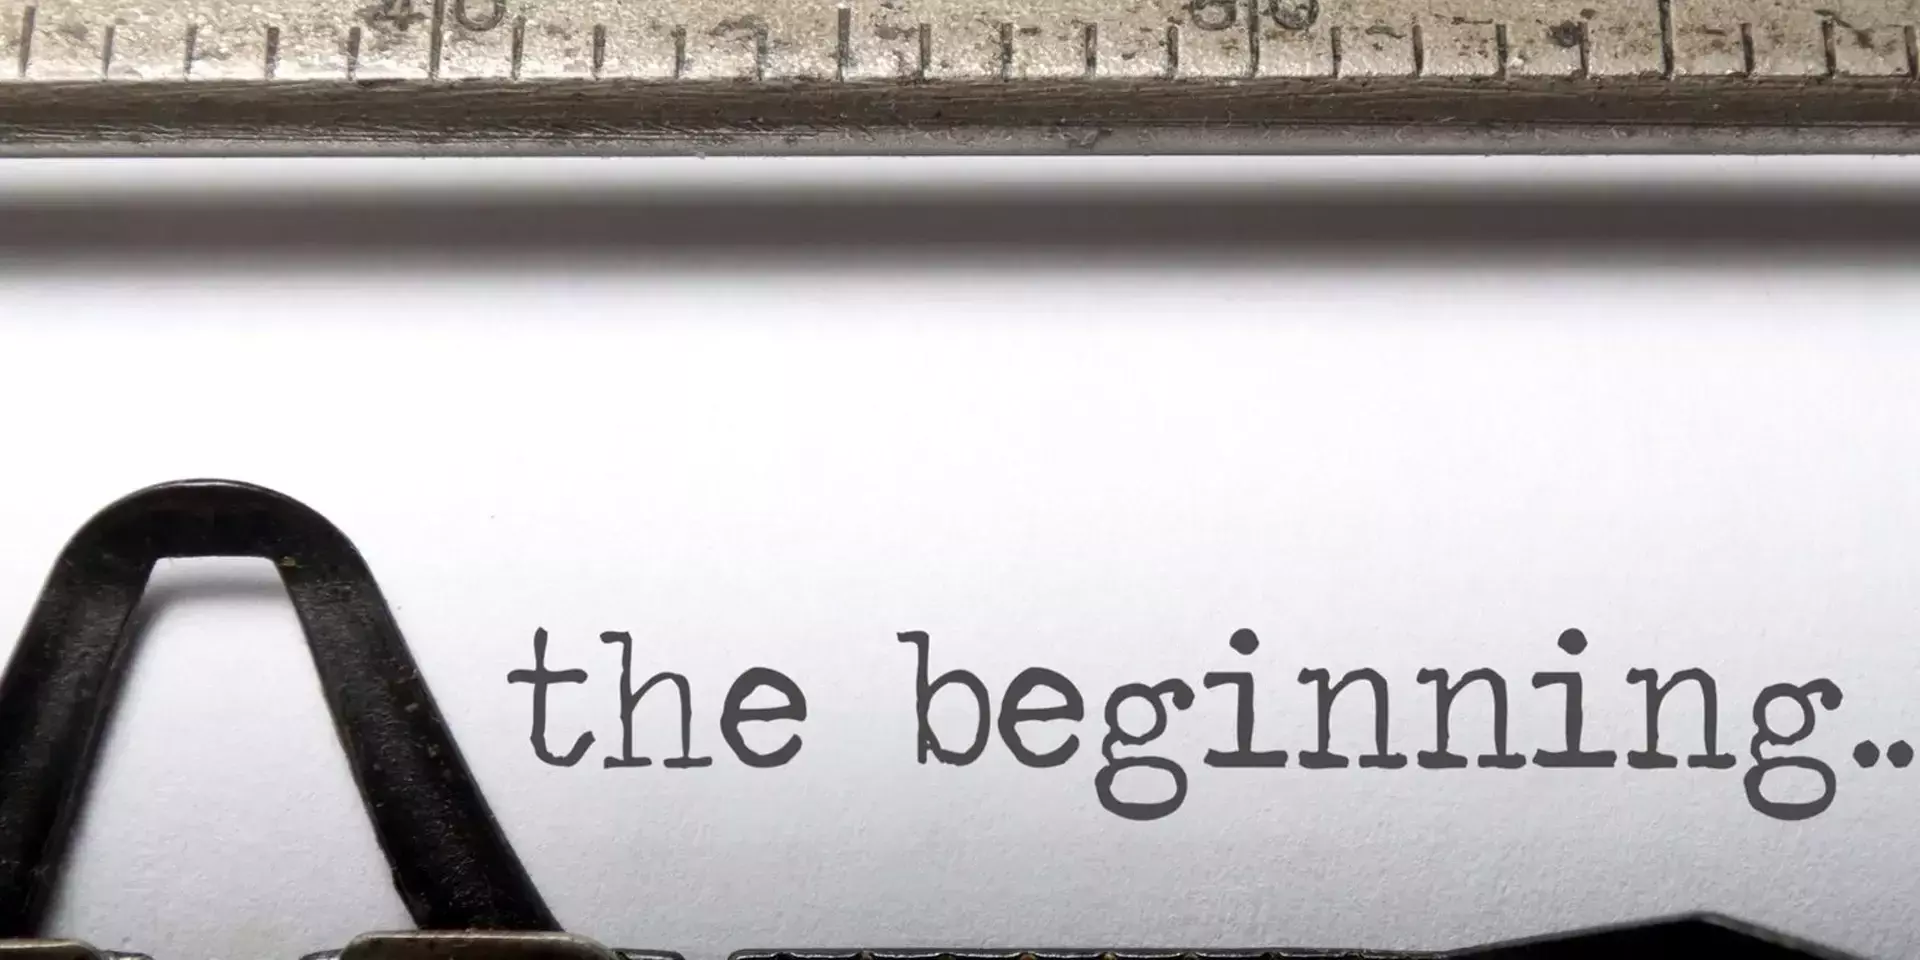 the beginning written out on a typewriter